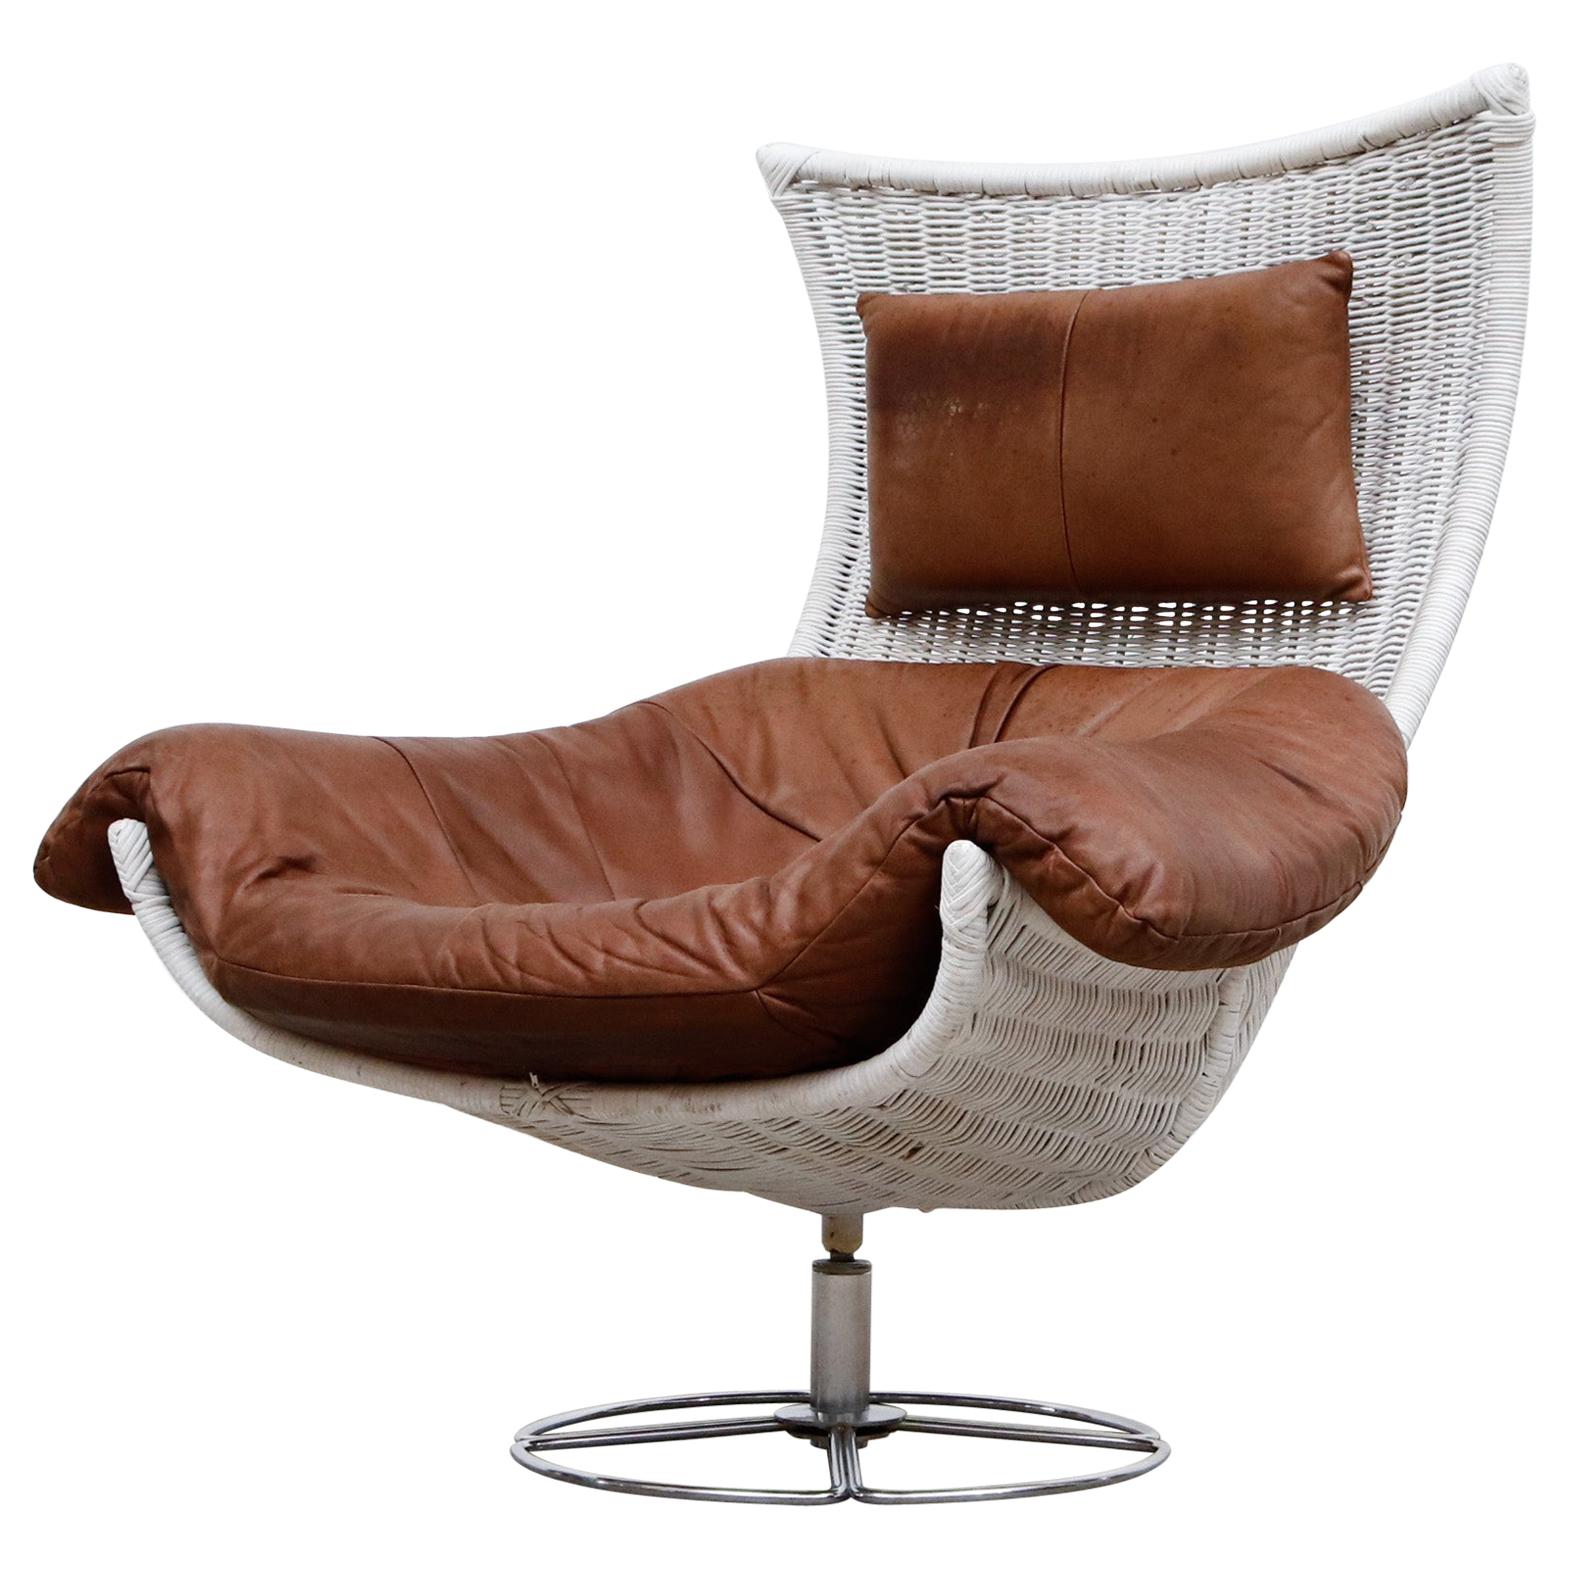 Gerard van den Berg White Rattan and Leather Lounge Chair